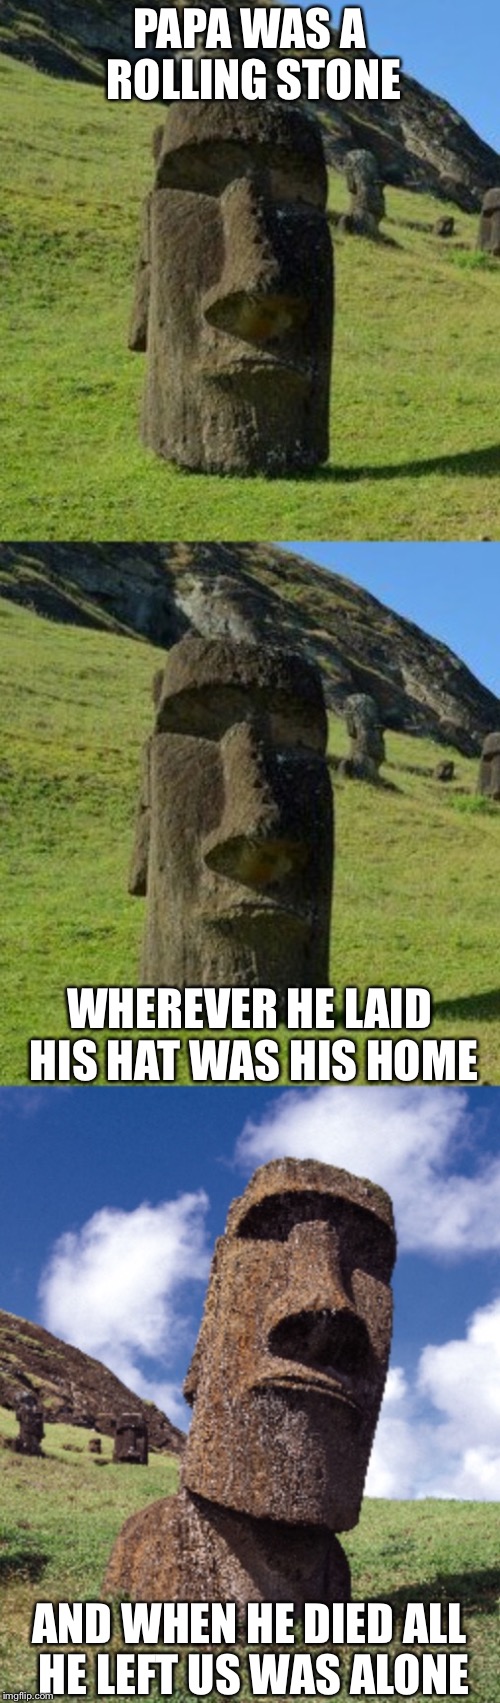 Bad Pun Moai | PAPA WAS A ROLLING STONE; WHEREVER HE LAID HIS HAT WAS HIS HOME; AND WHEN HE DIED ALL HE LEFT US WAS ALONE | image tagged in bad pun moai,rock week,memes | made w/ Imgflip meme maker